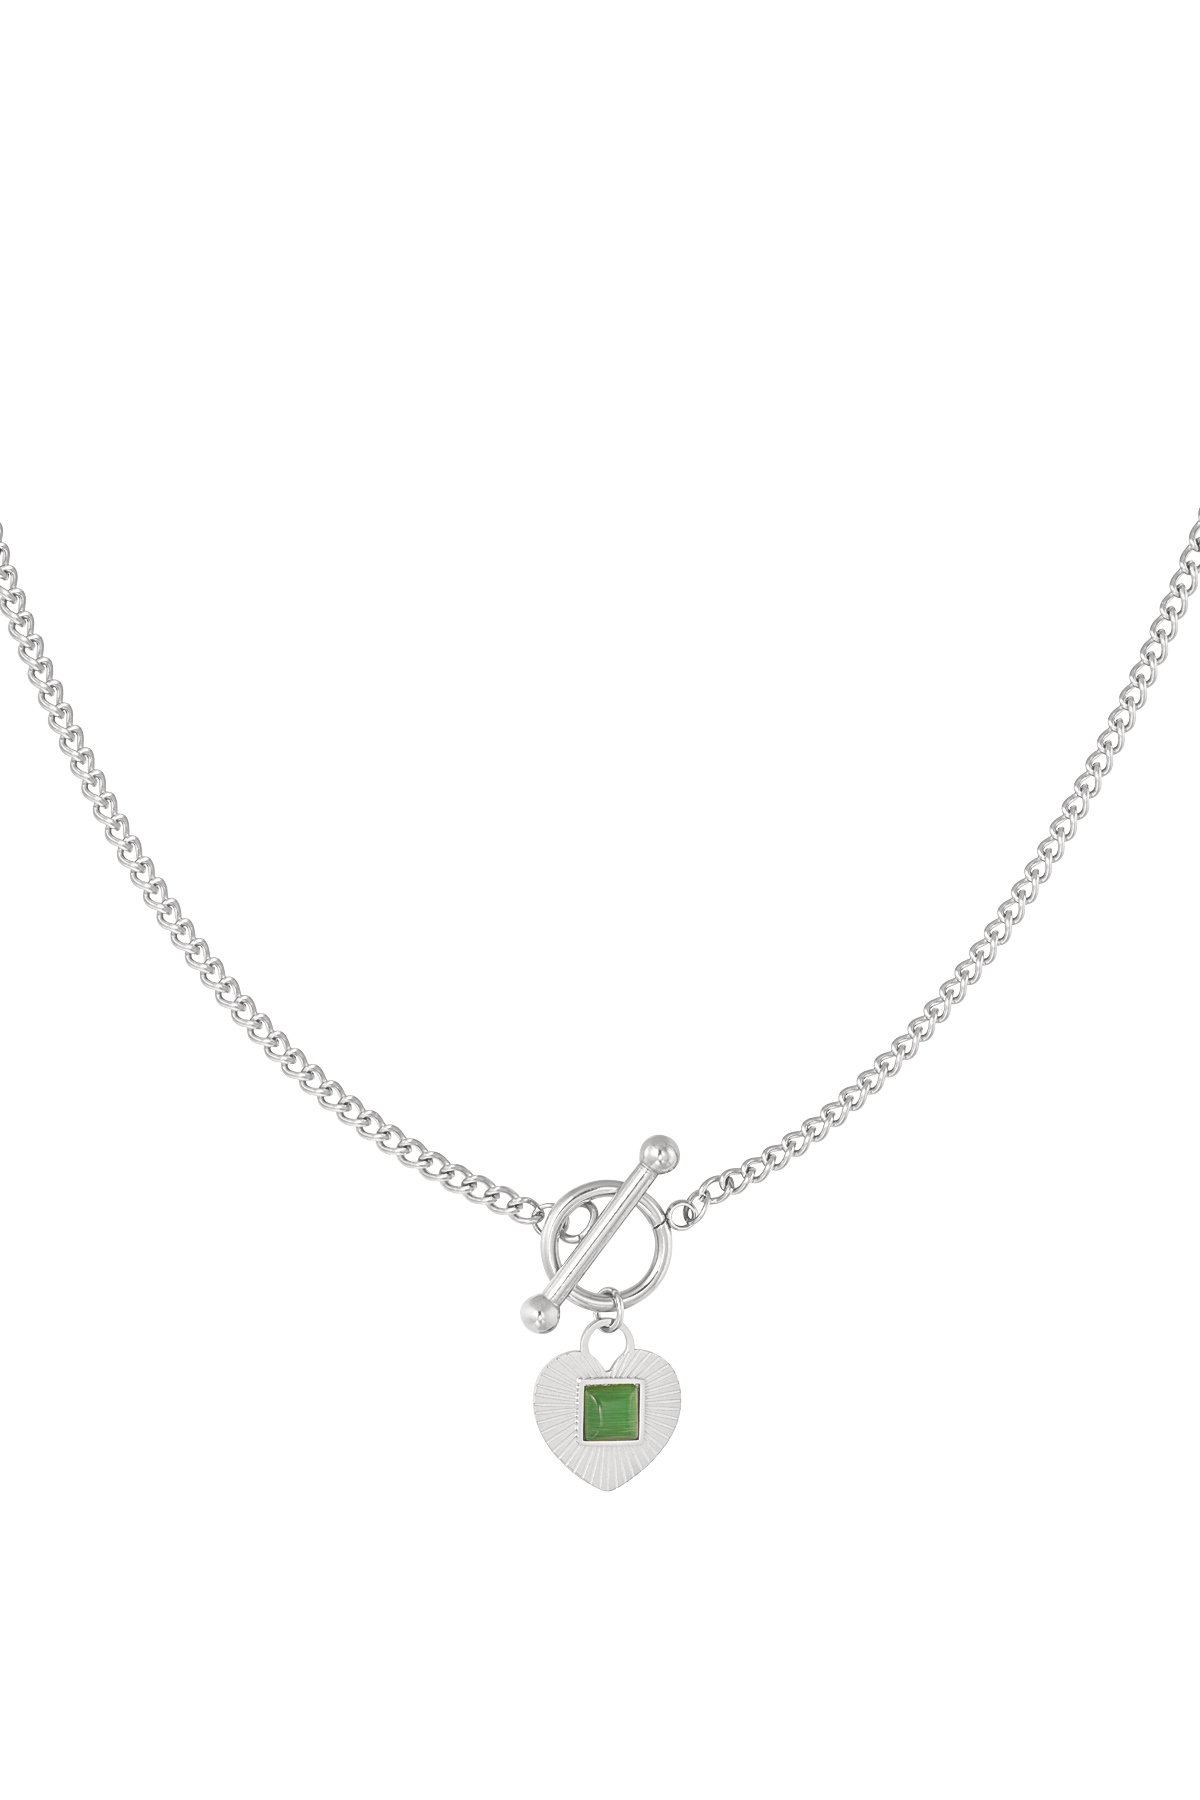 Chain round closure and green heart detail - silver